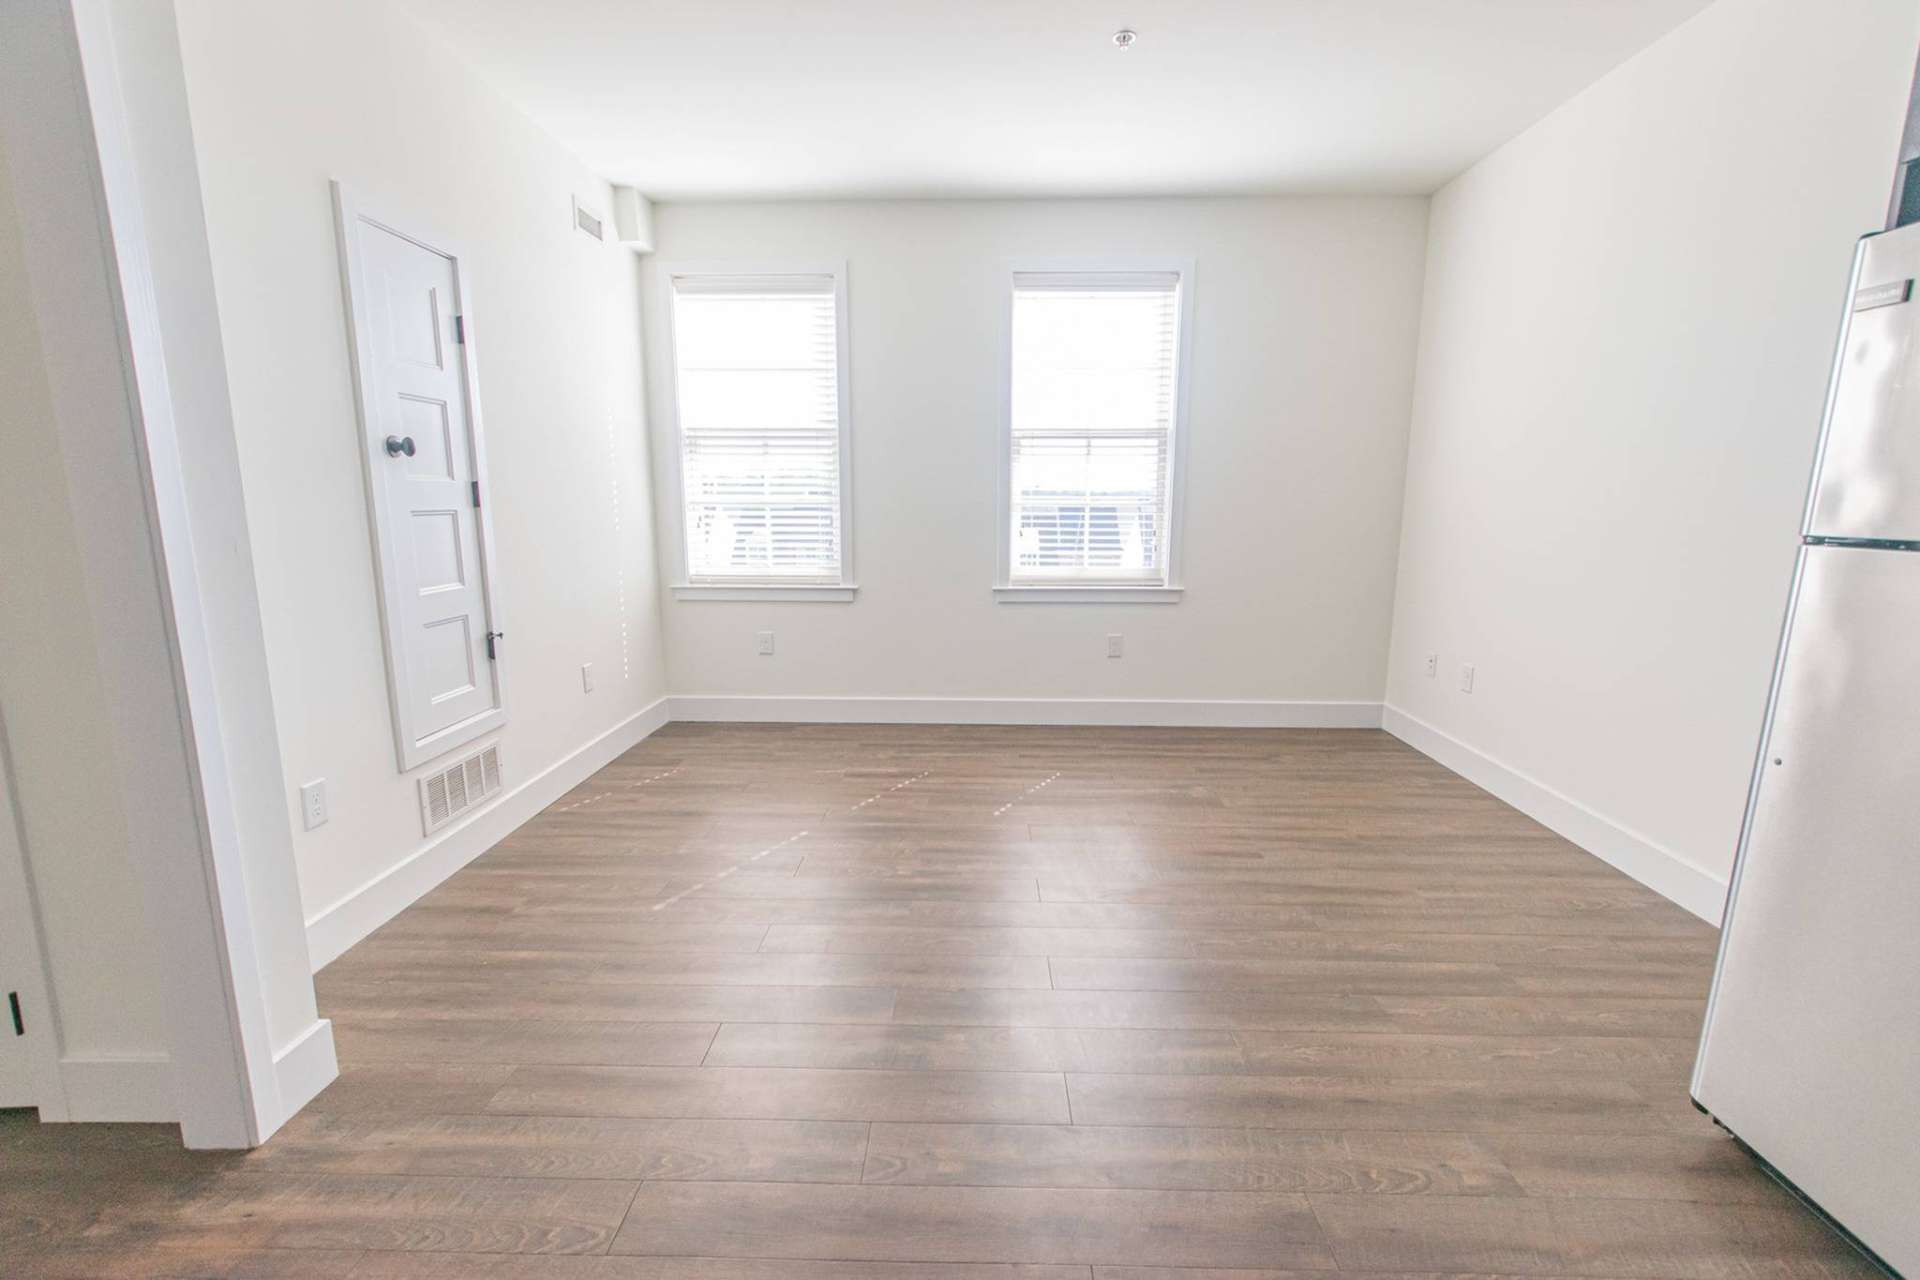 Spacious dining area with hardwood-style flooring and 2 windows.